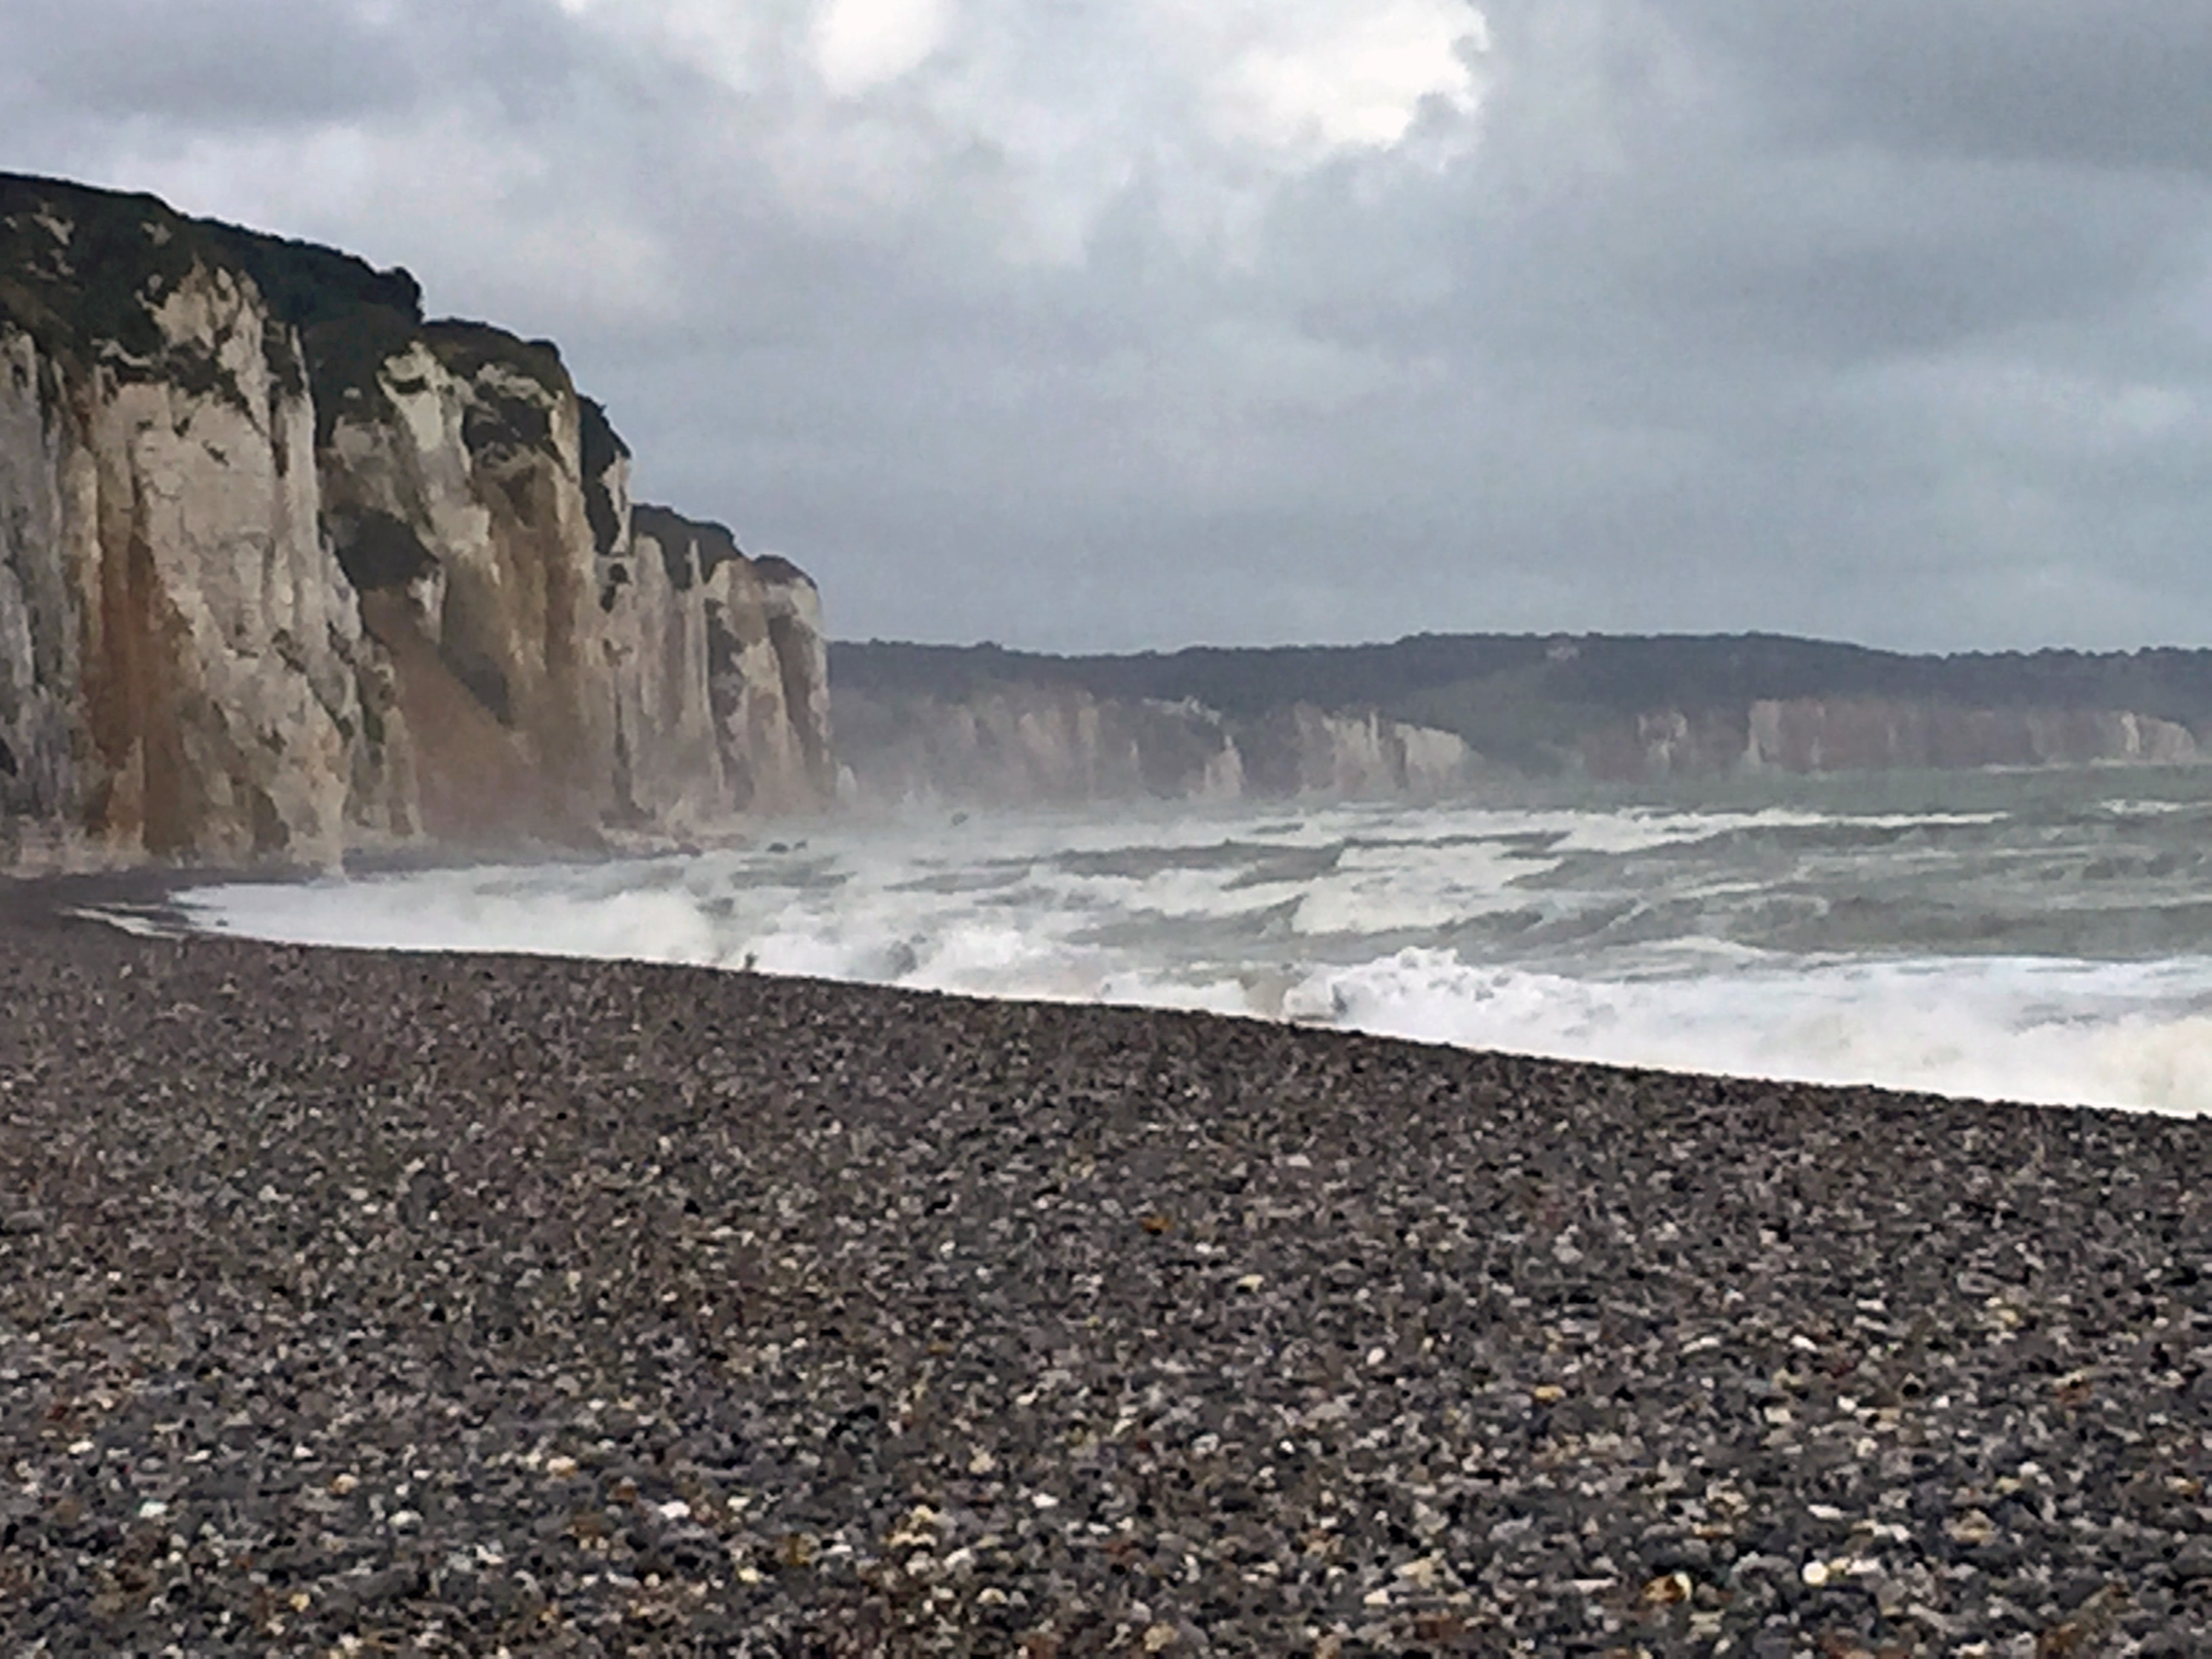 The chert beach and the cliffs at Dieppe.